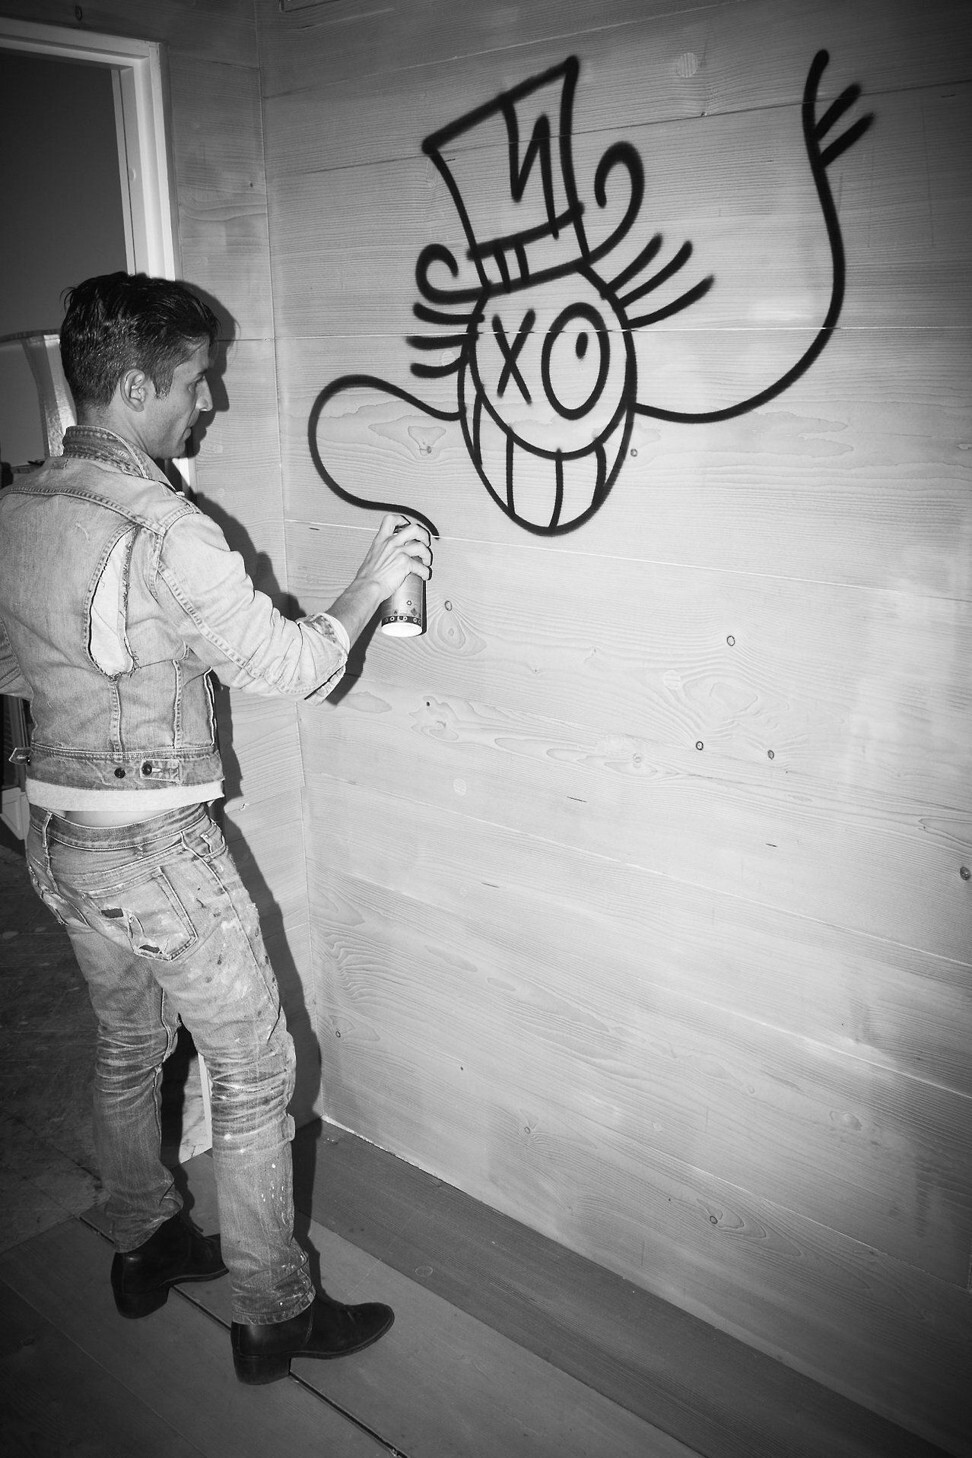 André Saraiva offered a custom mural painting for auction. Photo: Chufy Auction